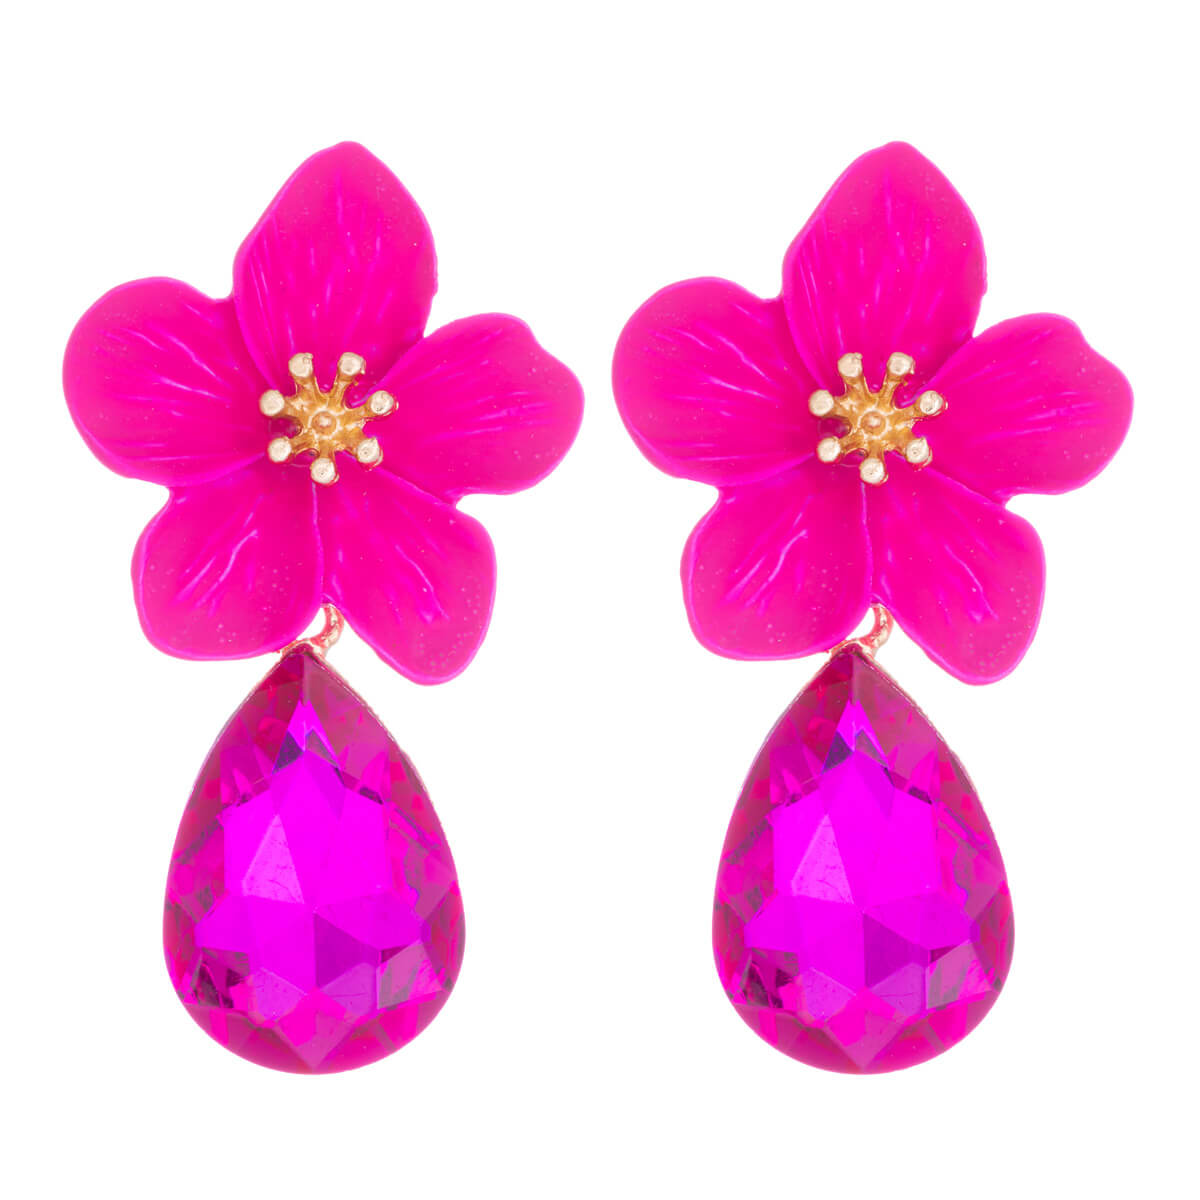 Flower earrings with hanging glass drops